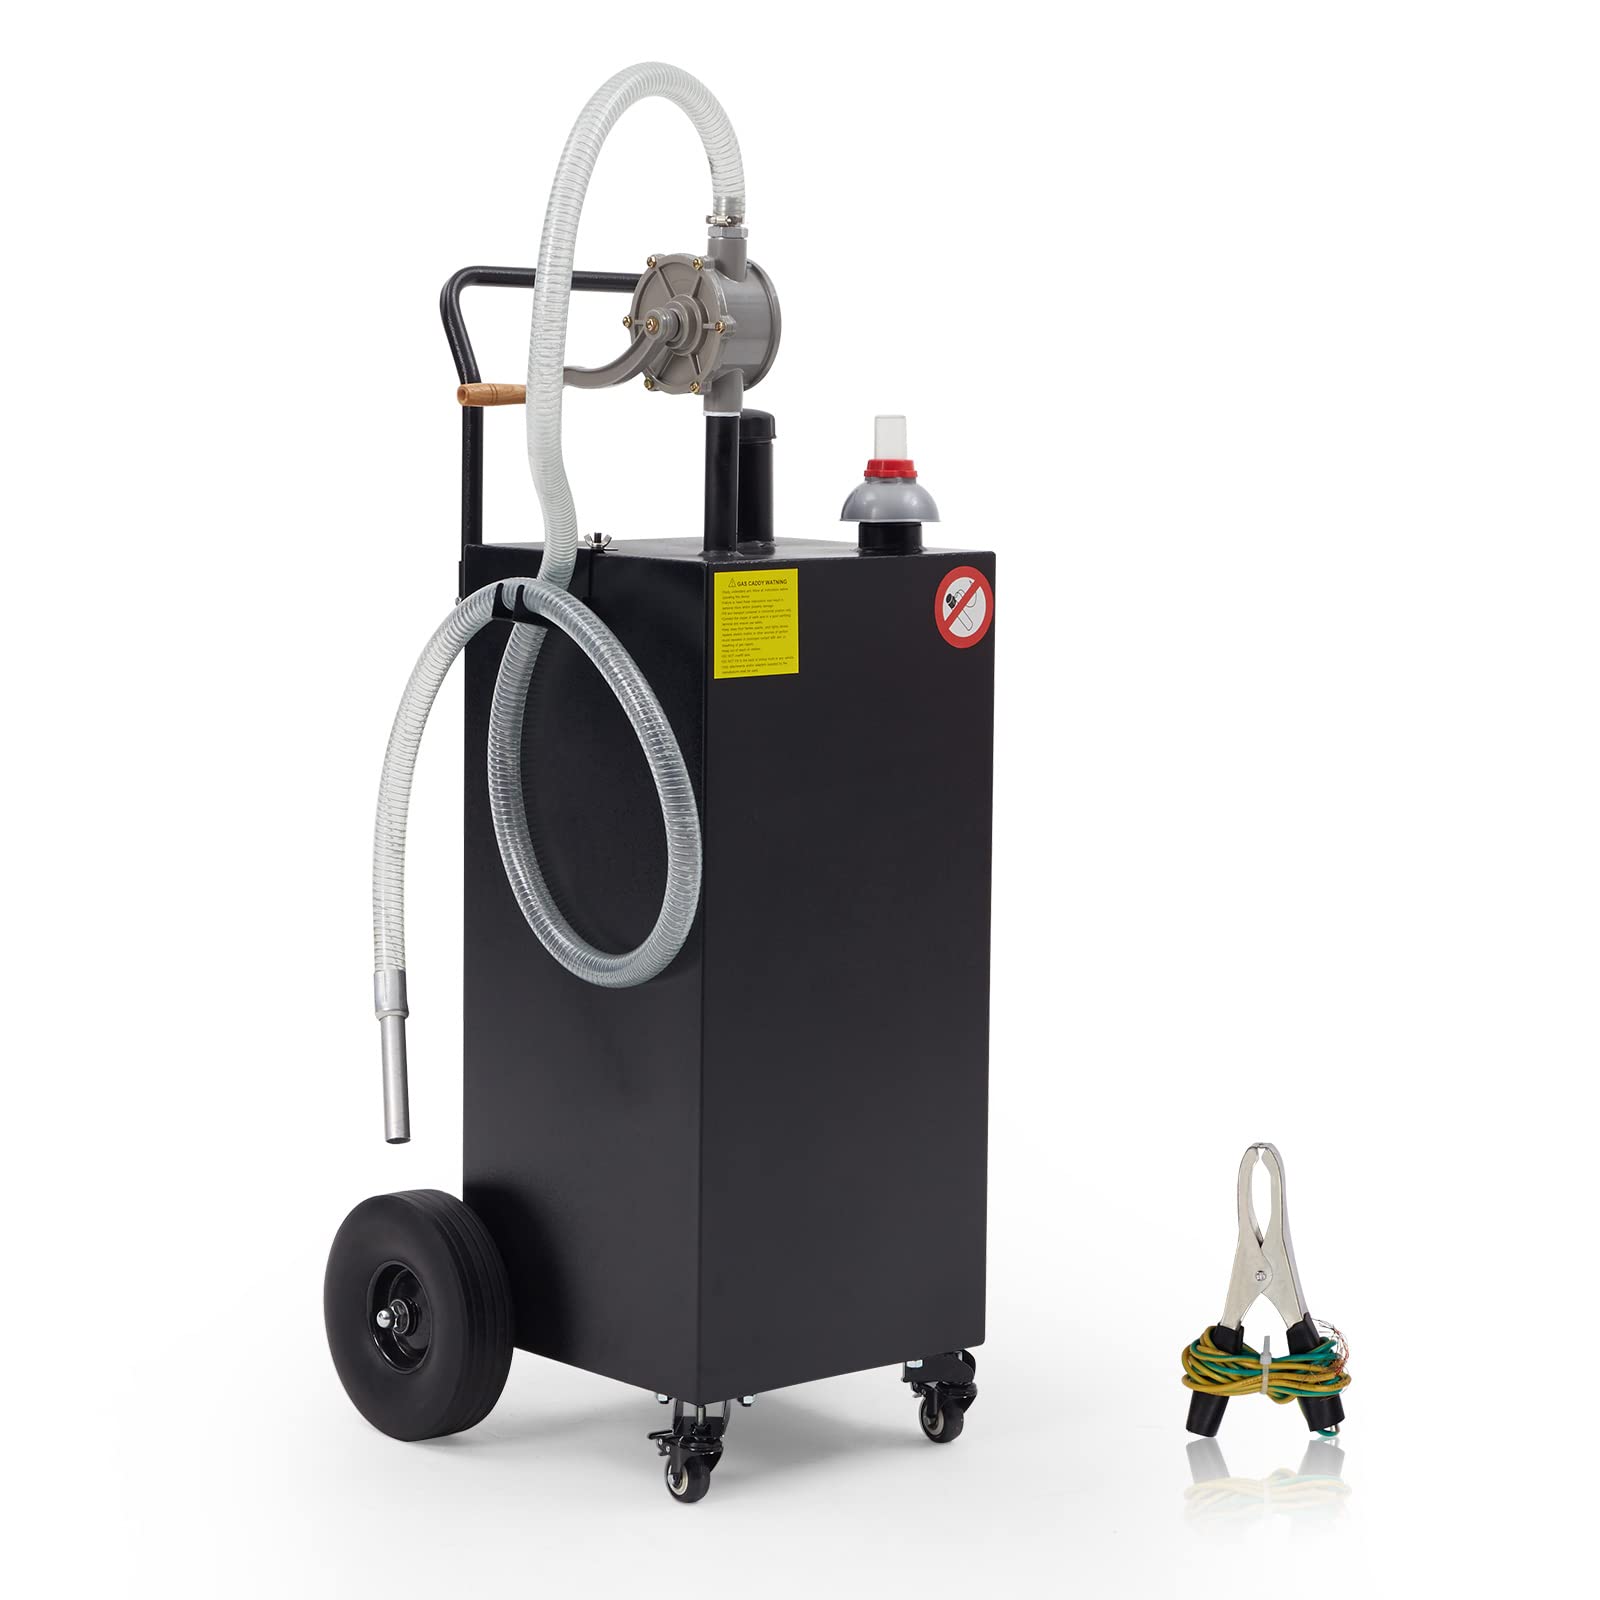 40 Gal Black Portable Gas Caddy with Pump for Fuel Storage